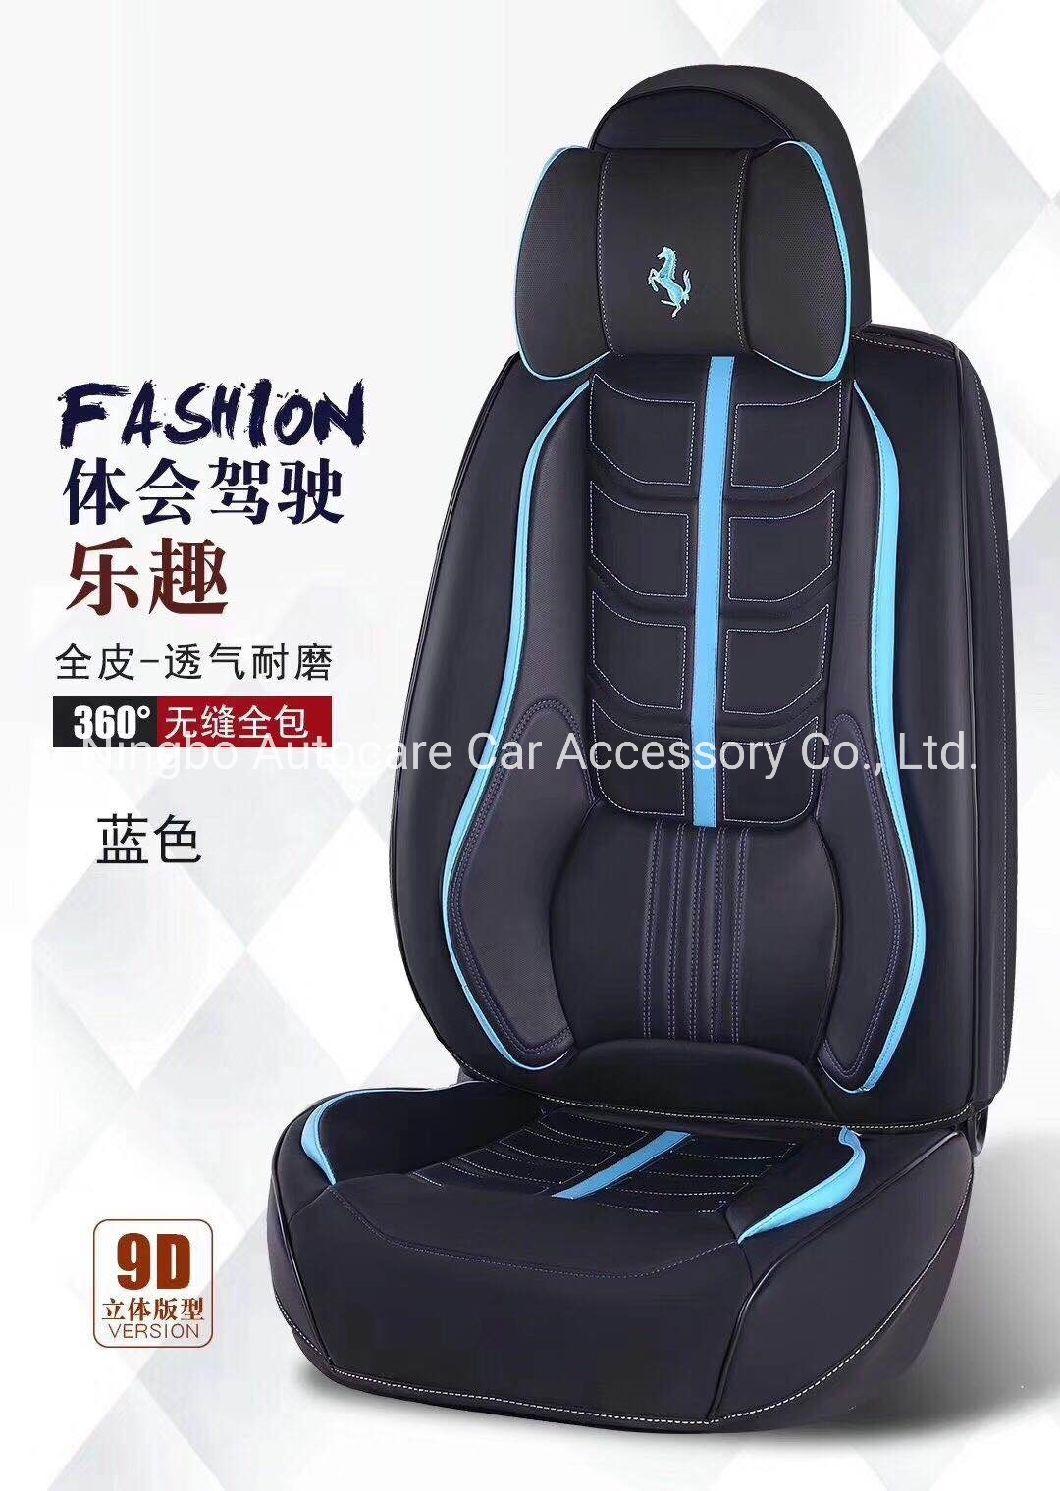 2021 Hot Fashion Car Accessory Car Decoration High Quality Car Seat Cover Universal Auto Car Seat Cover